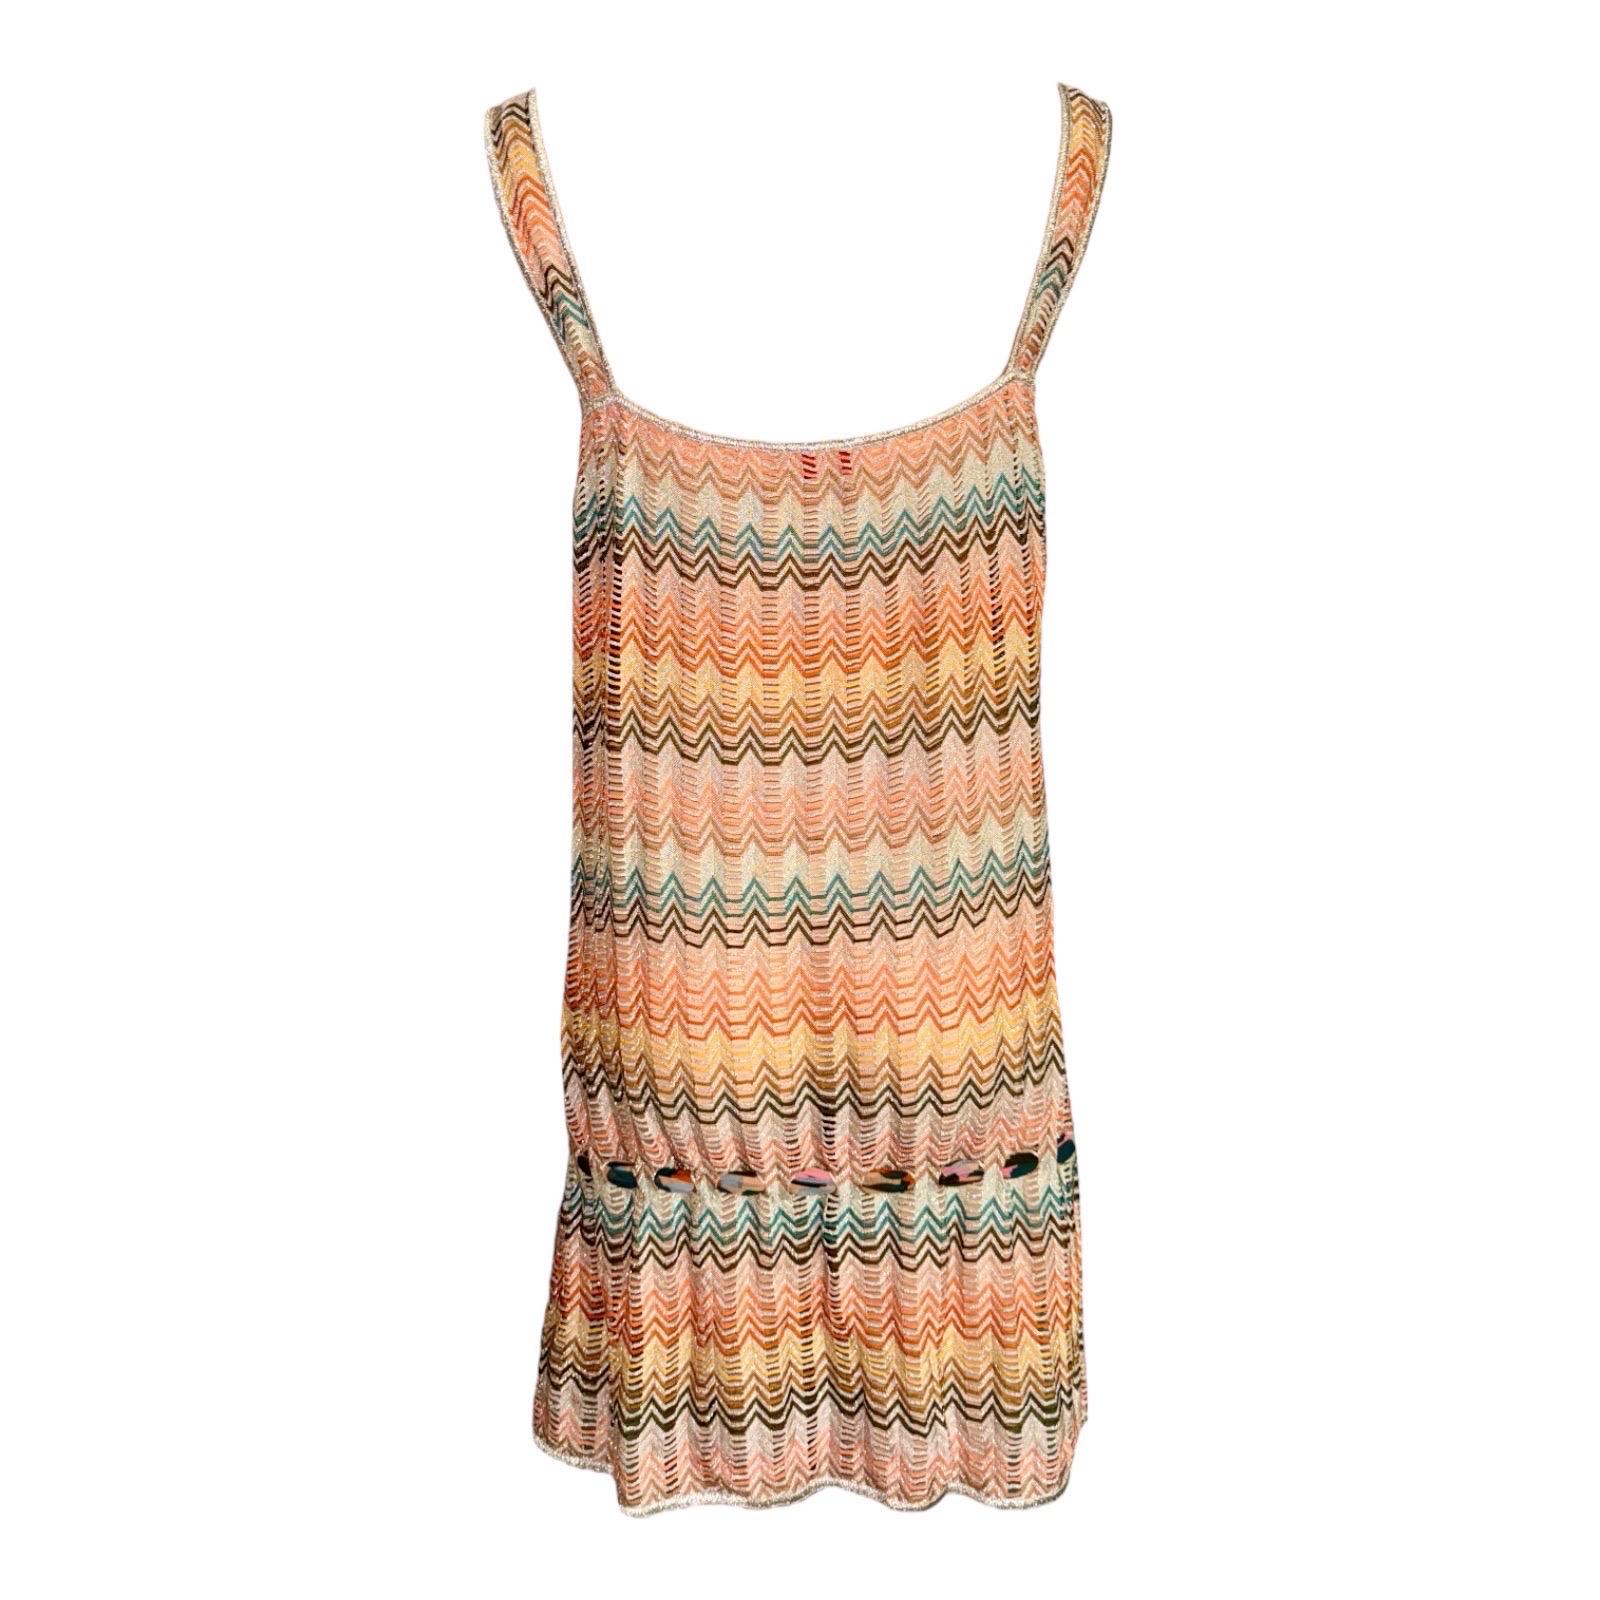 This multicolored sheer knit dress with lurex flecks from Missoni is a glamorous vacation piece. Combined with a floppy hat and statement sandals, this dress will lend a laidback look to your beachwear. Dress it up with heels for a fabulous night